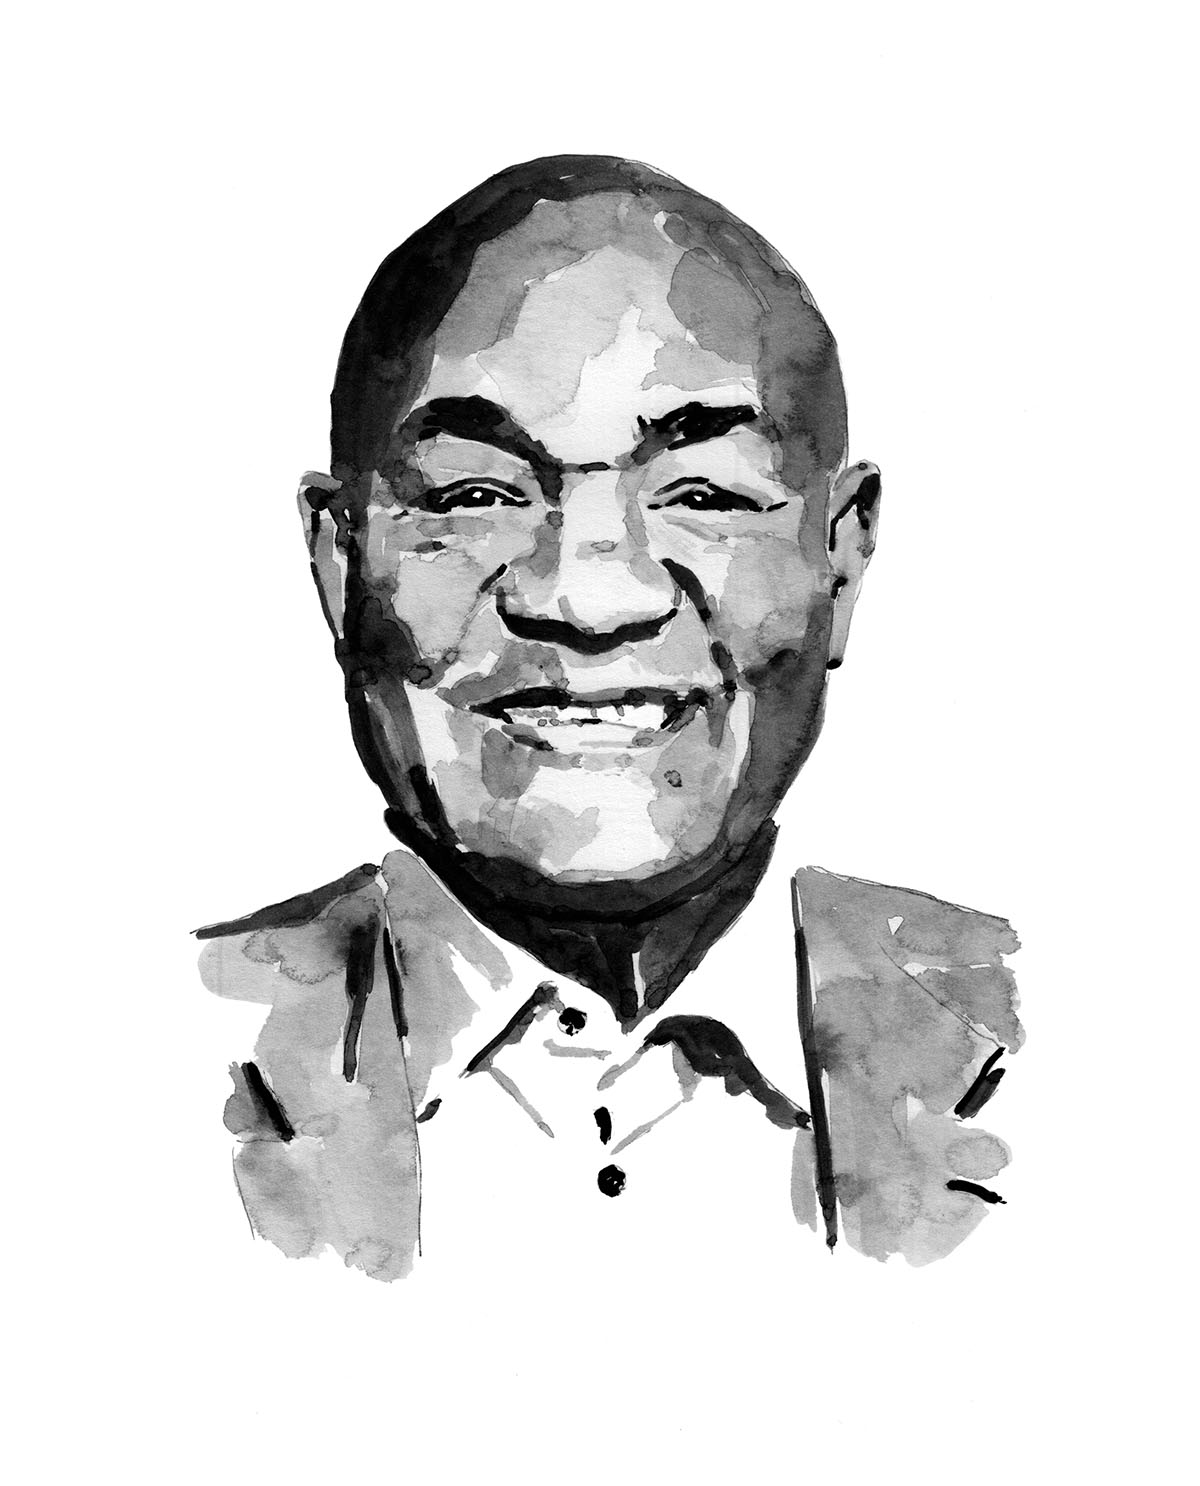 A black and white illustration of a smiling man